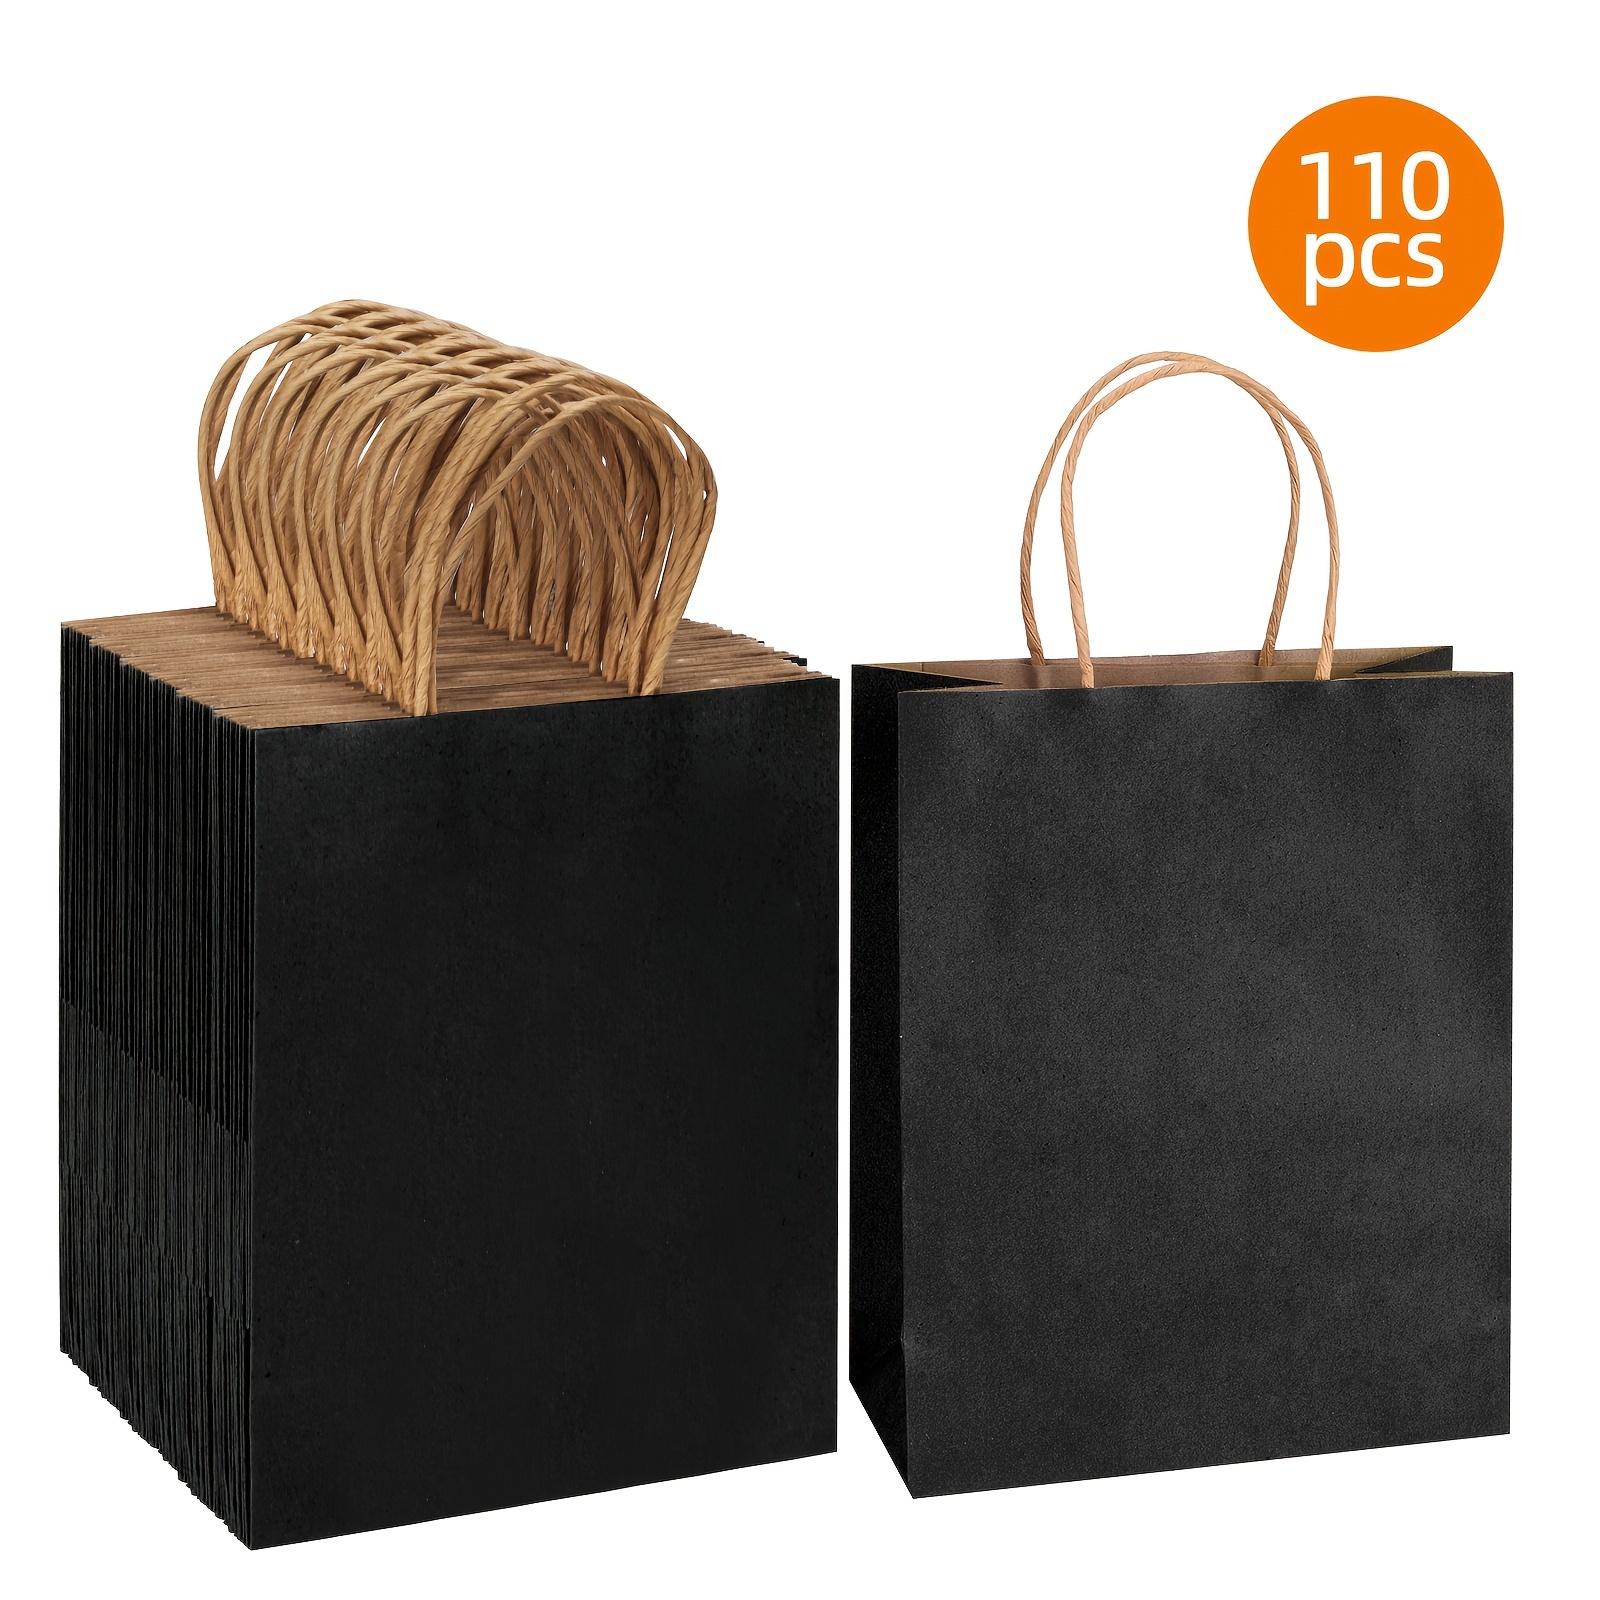 

110pcs Black Gift Bags Paper Gift Bags With Handles, Medium Sizes Gift Bags Bulk, Paper Bags For Small Business, Shopping Bags, Retail Bags, Party Bags, Favor Bags, 8x4x10 In